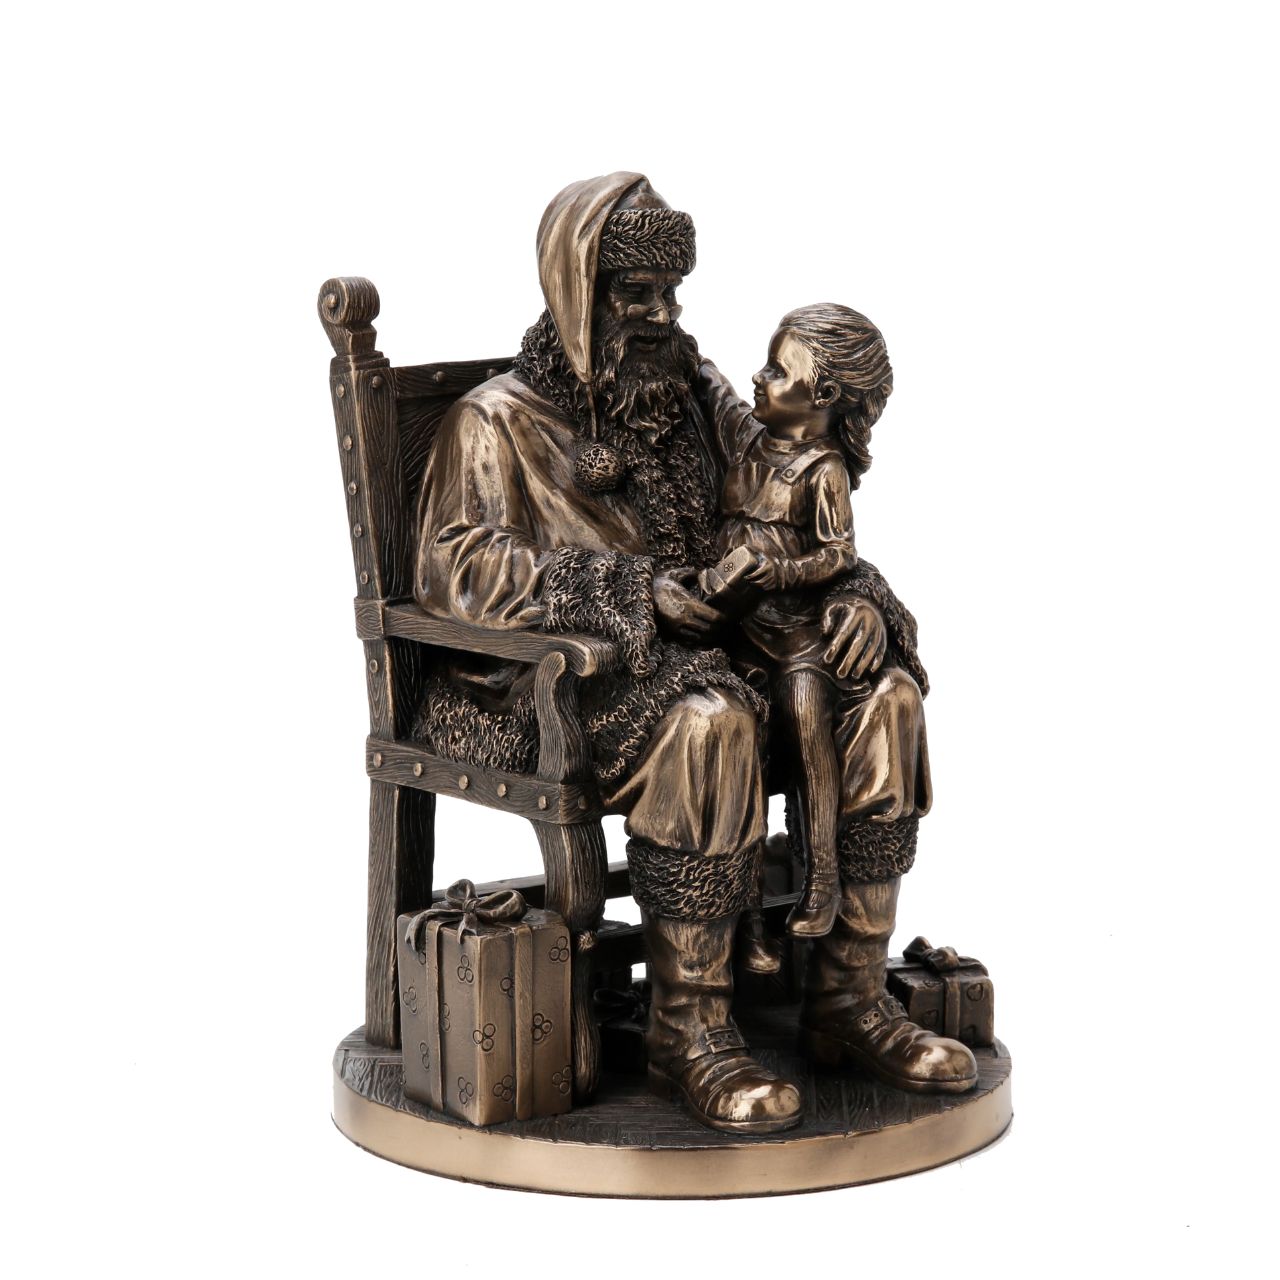 Visit to Santa by Genesis  Bring the magic of Christmas to your home this festive season. - Genesis Bronze Christmas Ornament depicting a little girl's visit to Santa. - This beautifully crafted sculpture would make a wonderful gift.